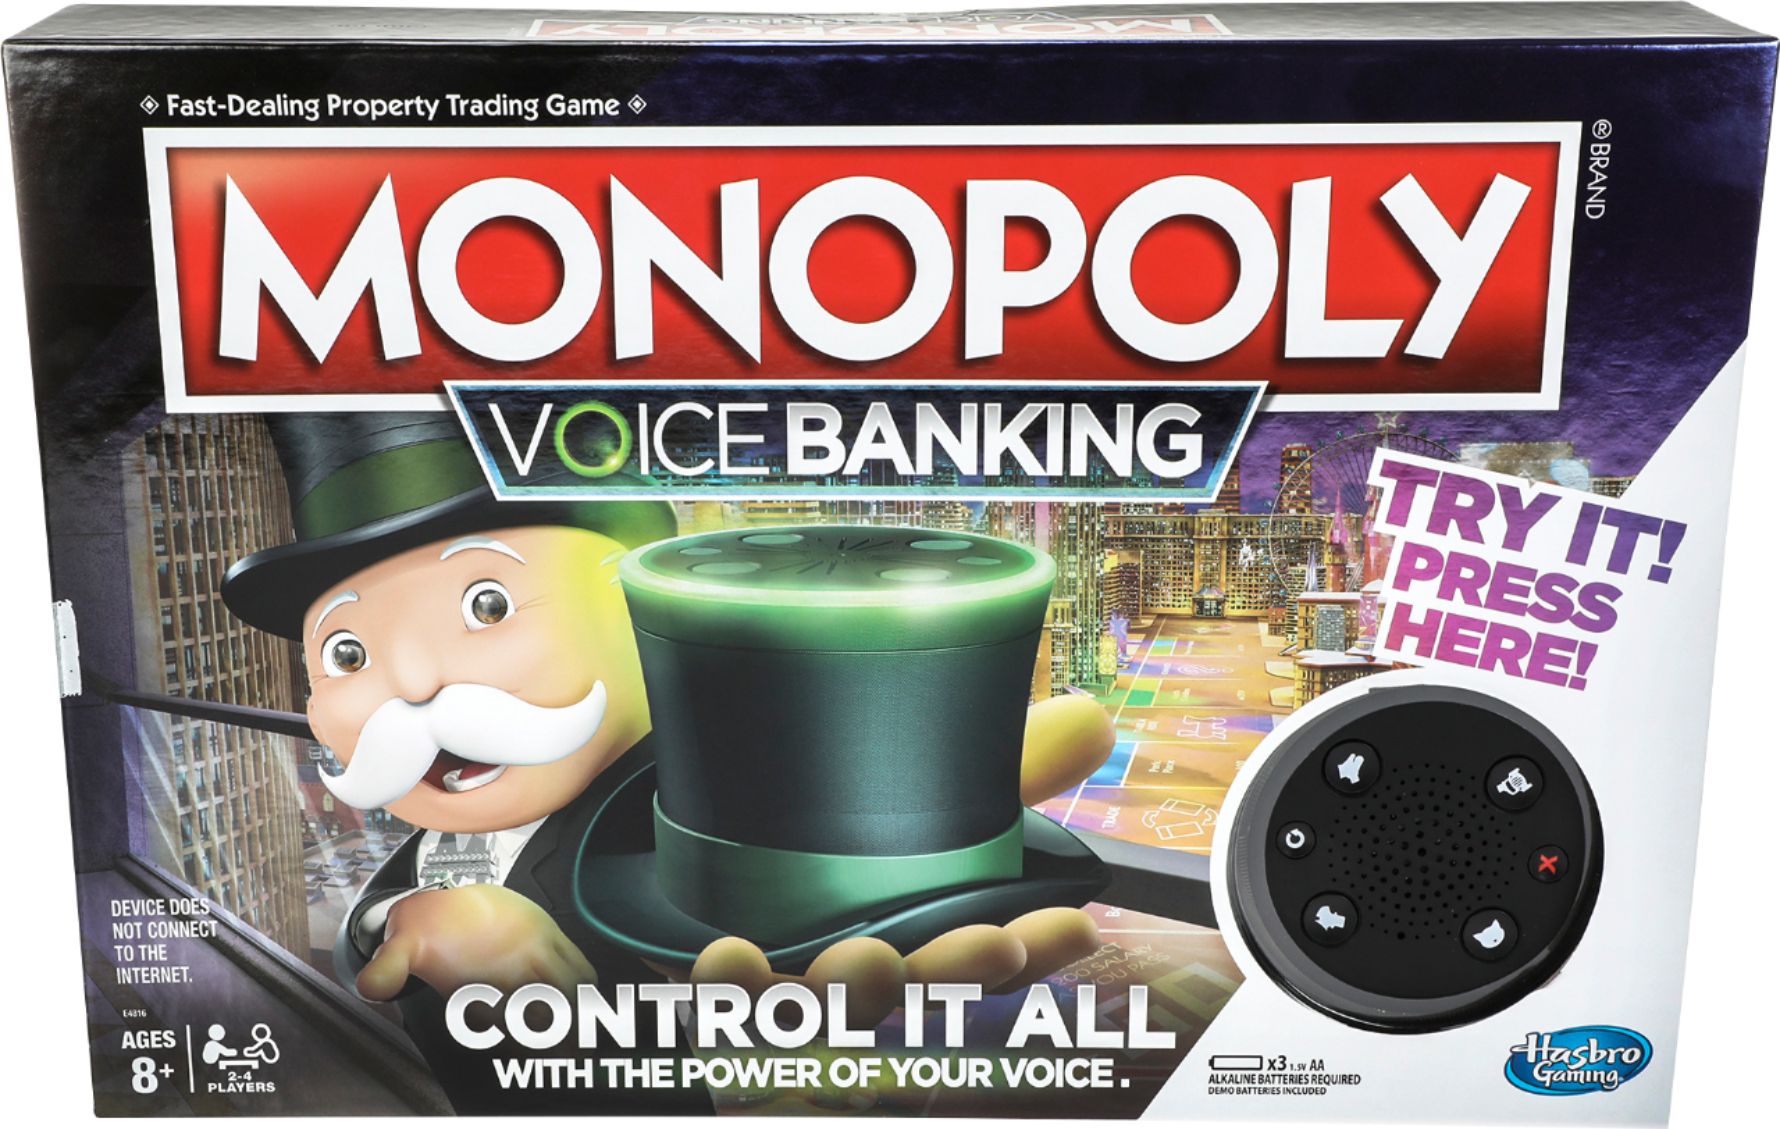 Monopoly ELECTRONIC BANKING GAME, TRADING GAME, FOR 2 TO 6 PLAYERS